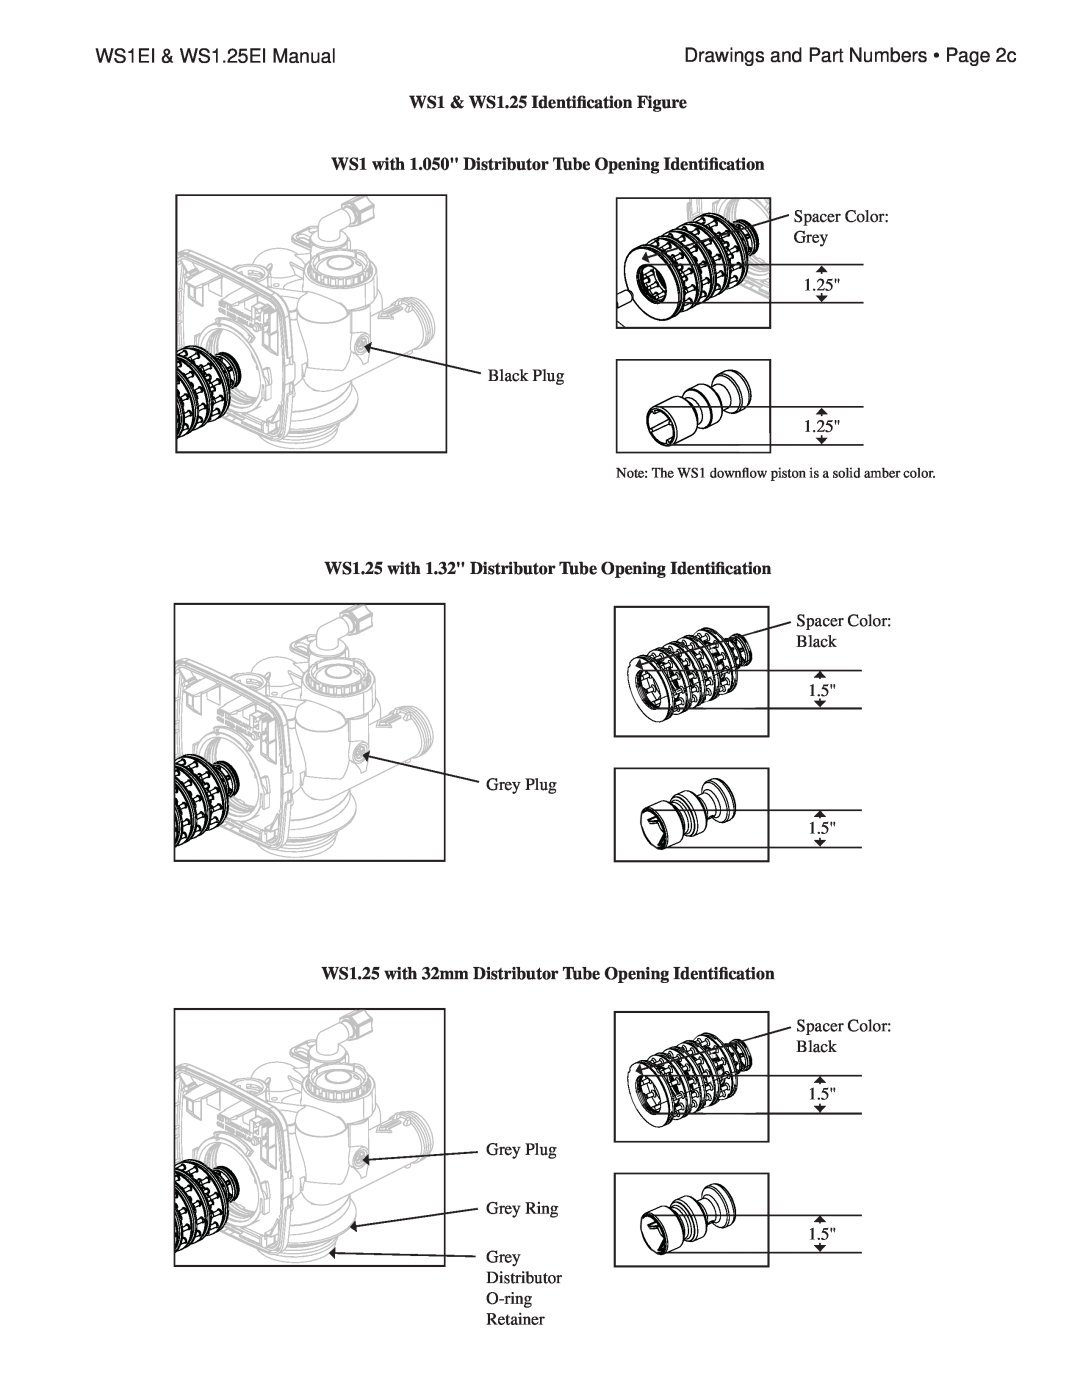 OEM Systems WS1EI & WS1.25EI Manual, Drawings and Part Numbers Page 2c, WS1 & WS1.25 Identiﬁcation Figure 